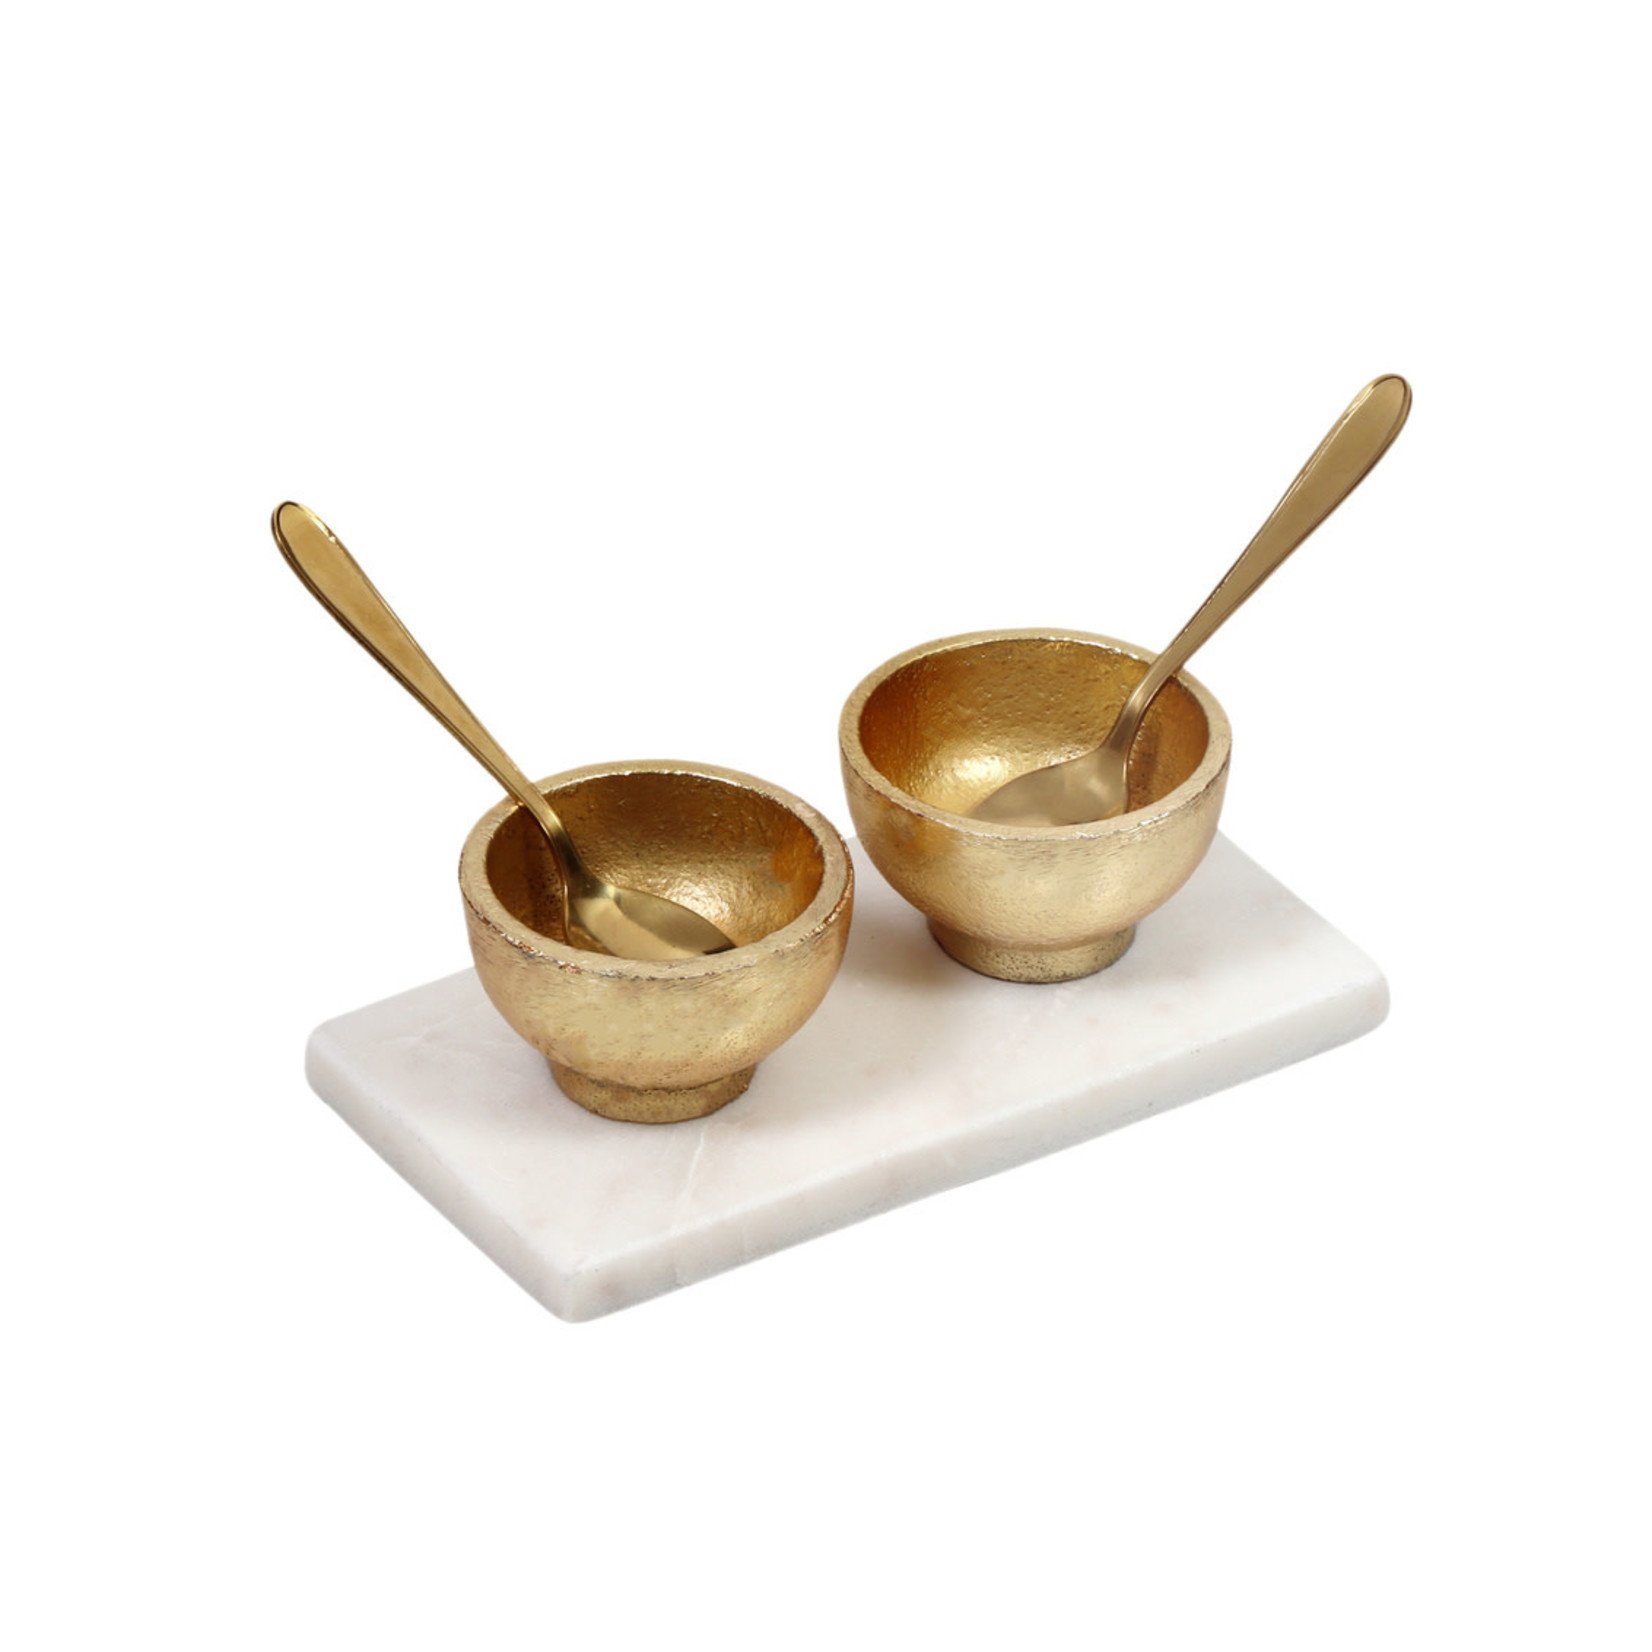 50549 Salt Dish Small With A Spoon